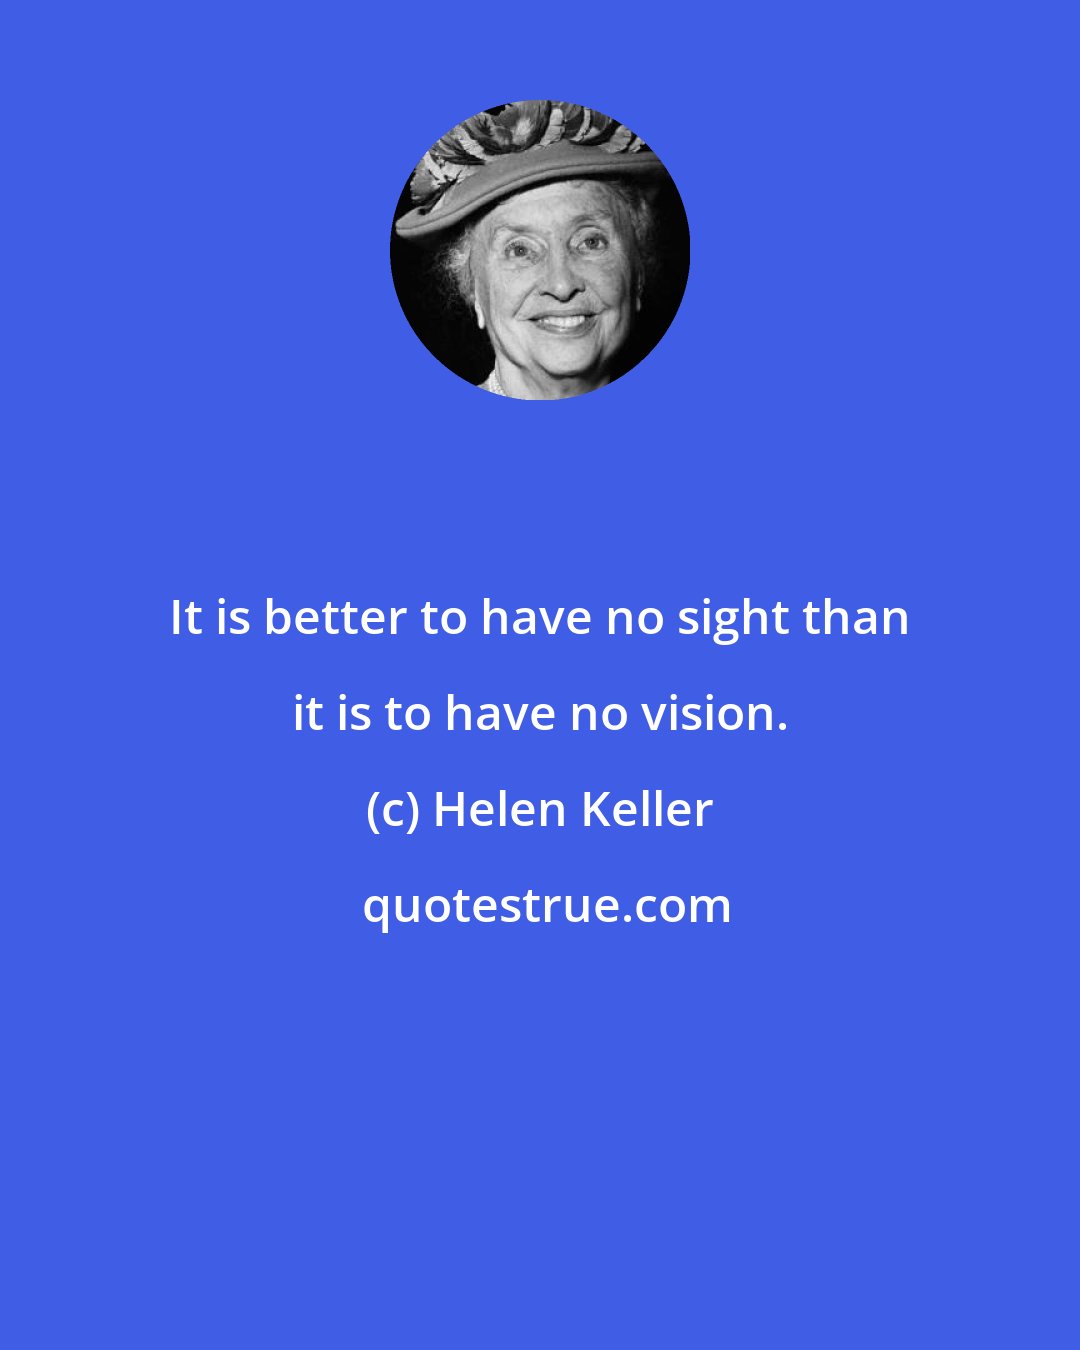 Helen Keller: It is better to have no sight than it is to have no vision.